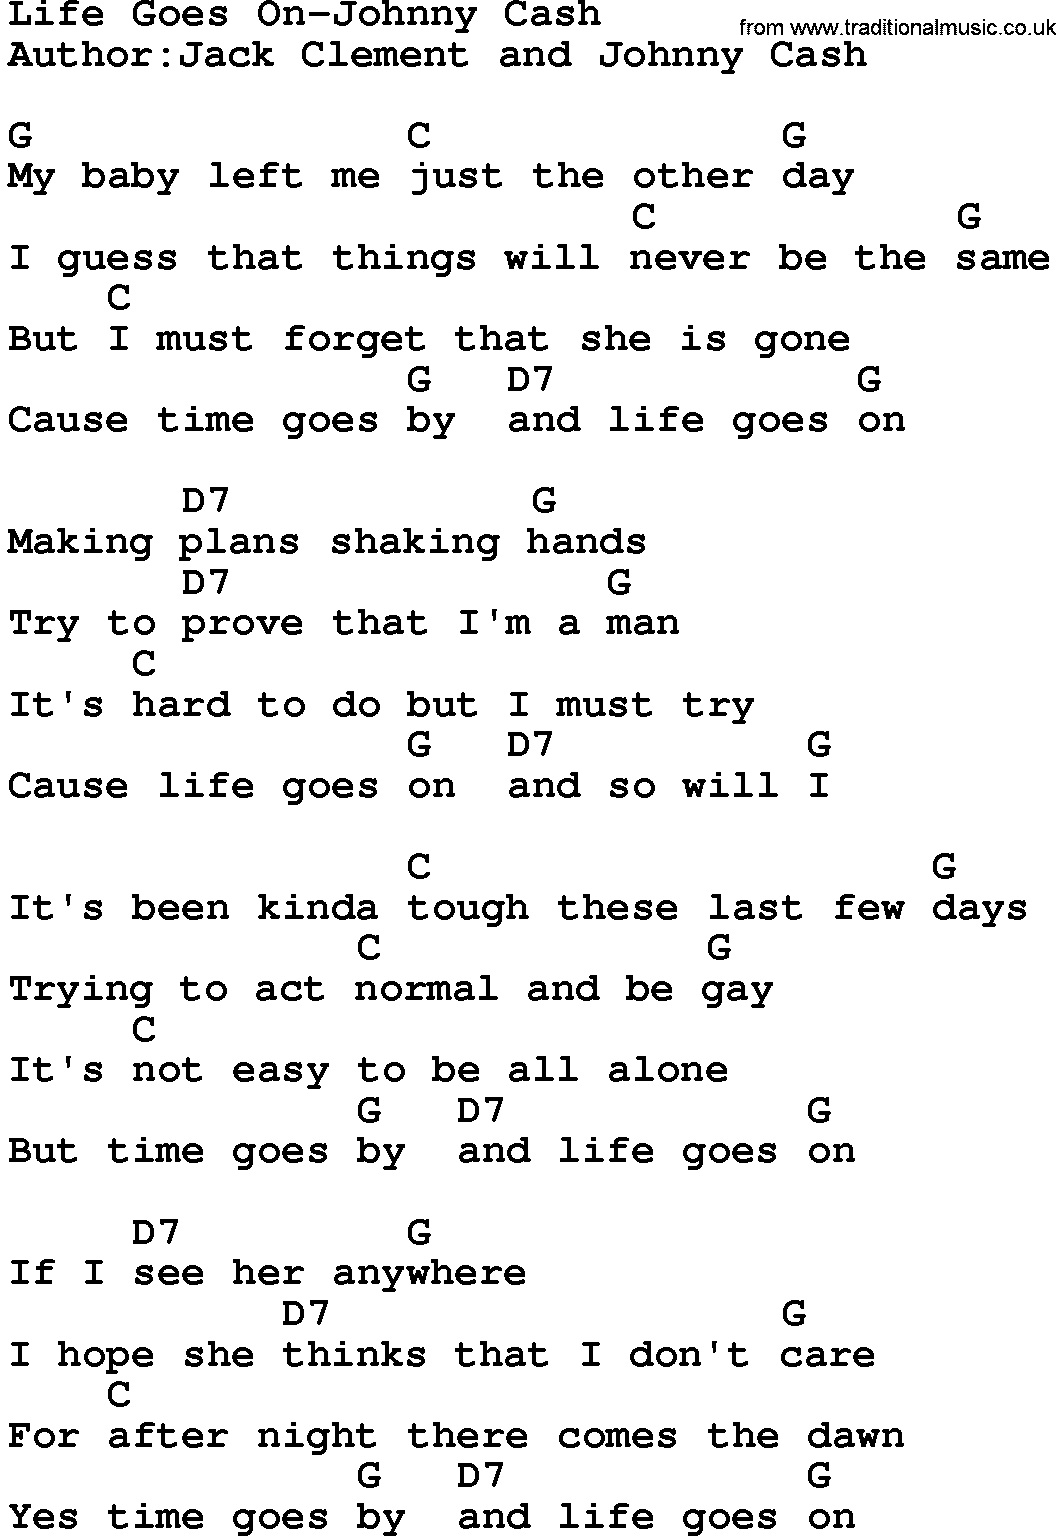 Country music song: Life Goes On-Johnny Cash lyrics and chords